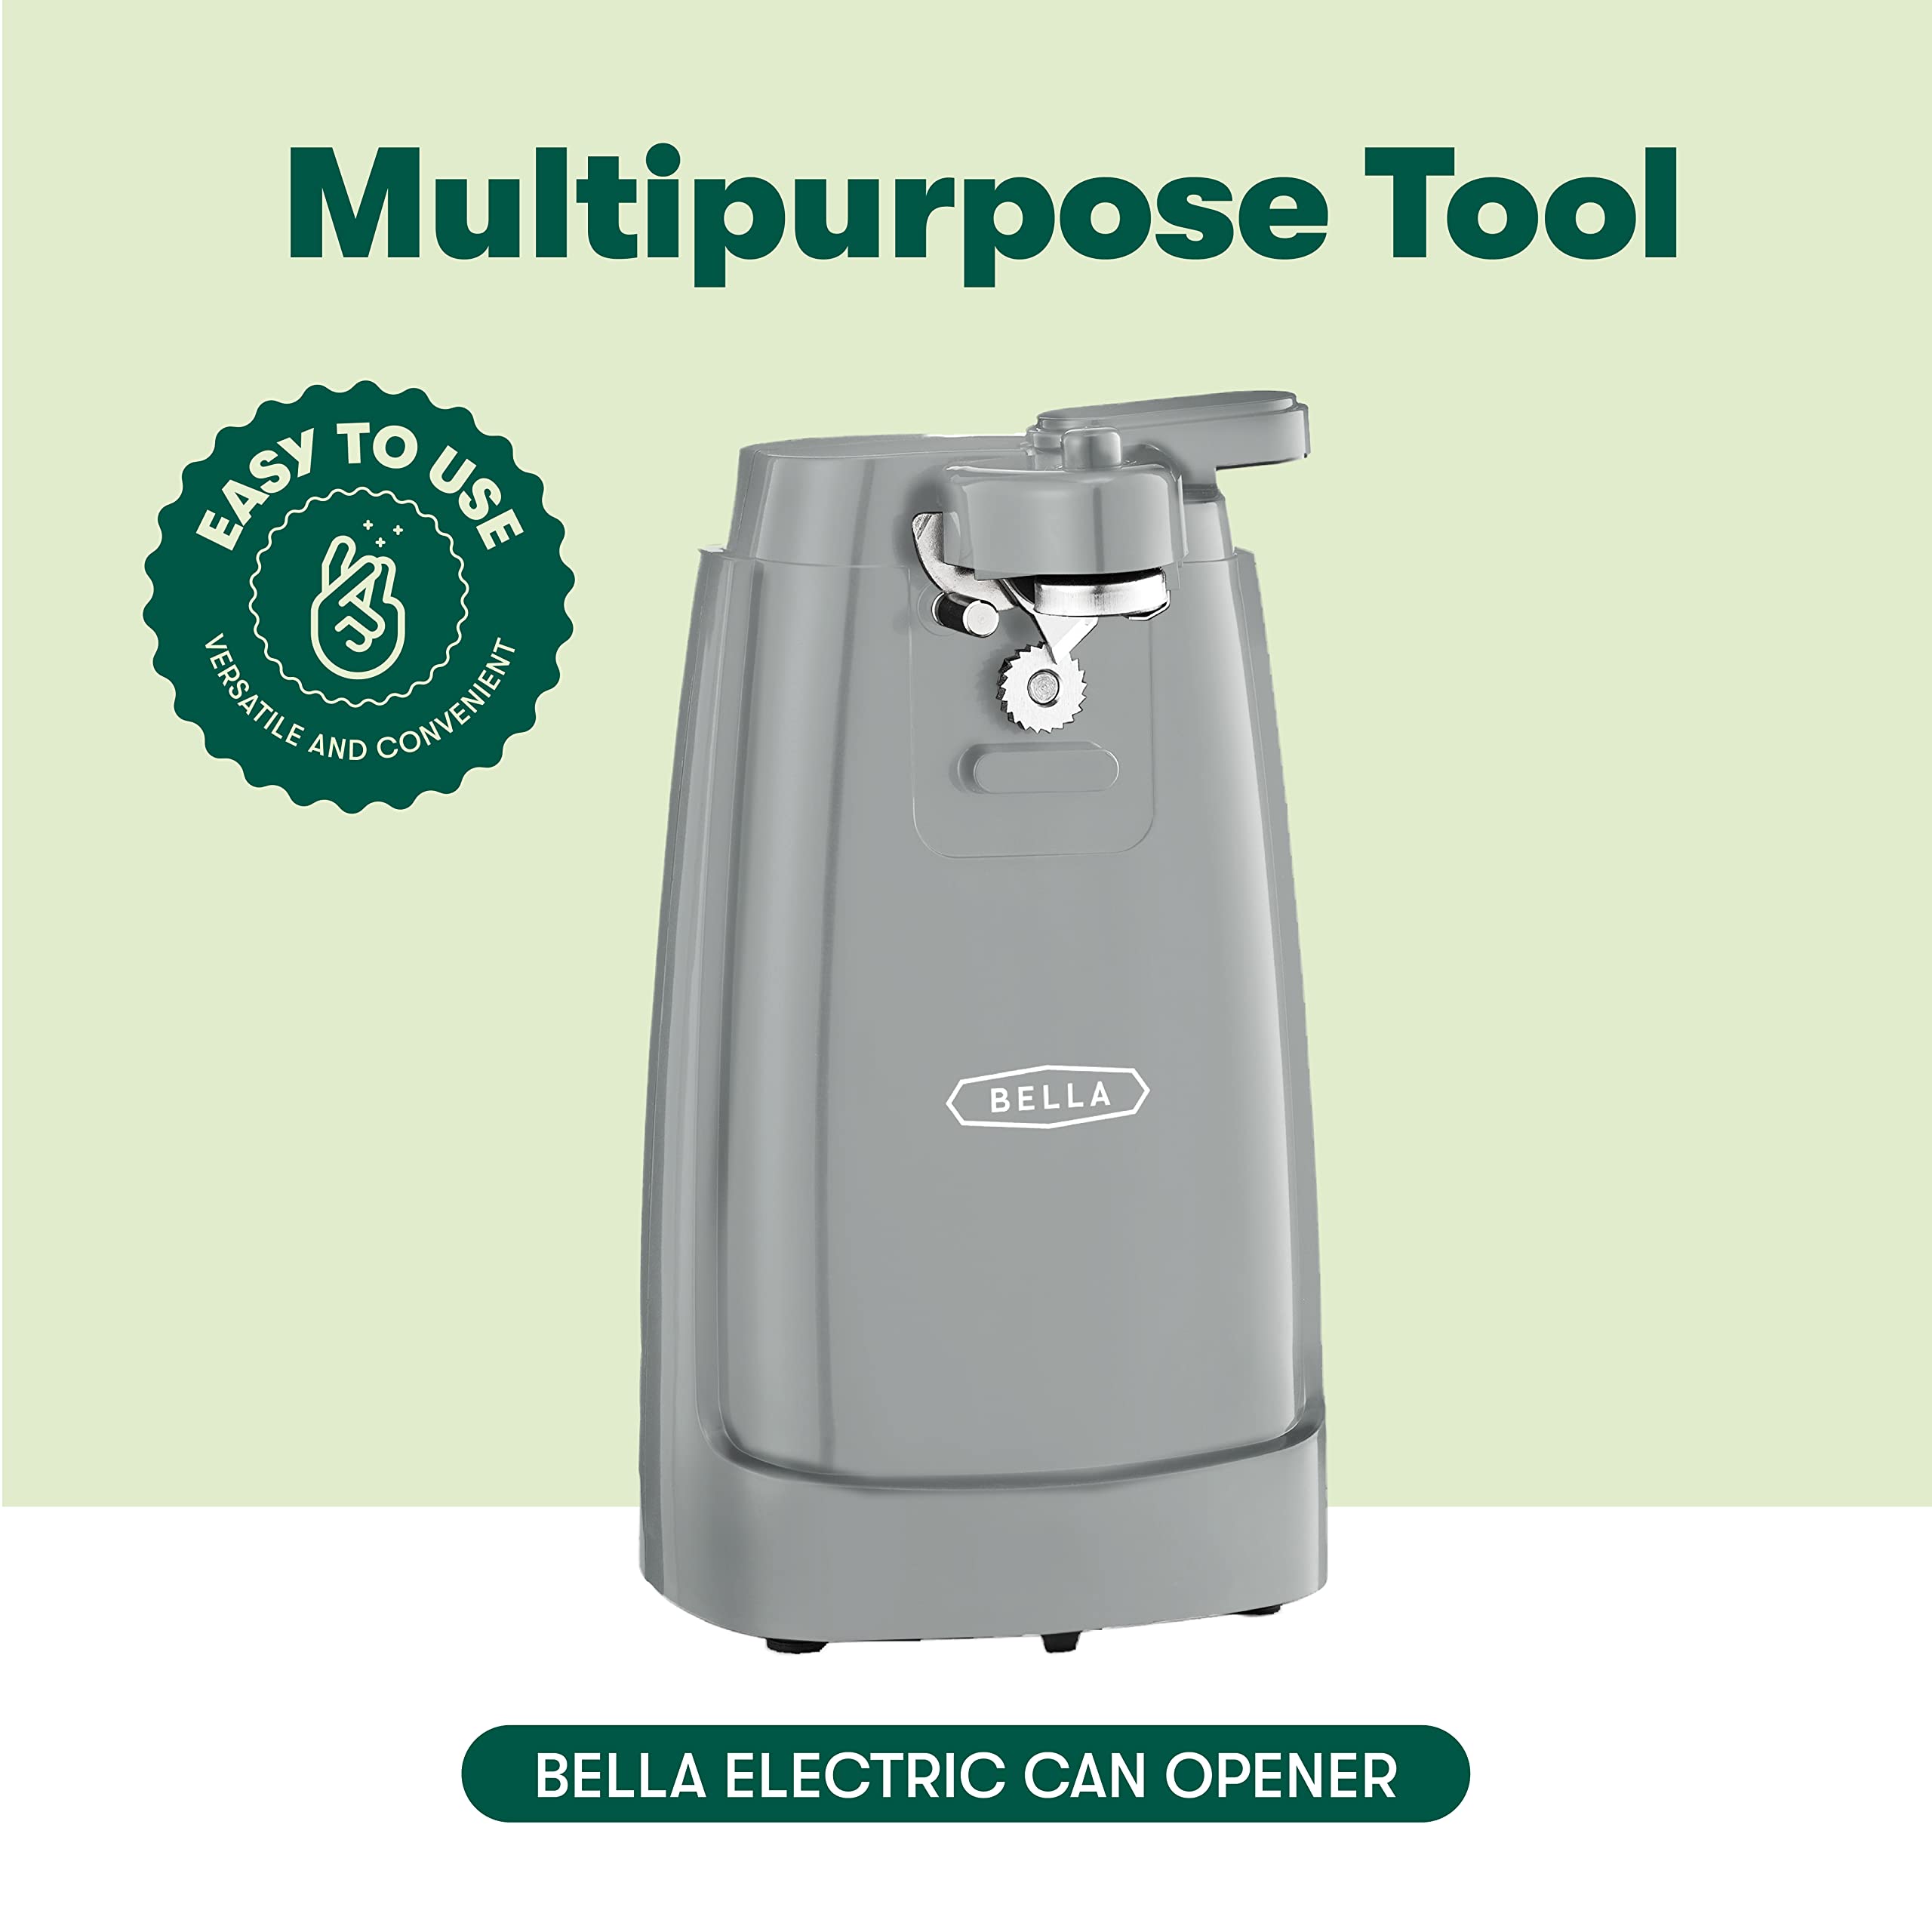 BELLA Electric Can Opener and Knife Sharpener, Multifunctional Jar and Bottle Opener with Removable Cutting Lever and Cord Storage, Stainless Steel Blade, Gray